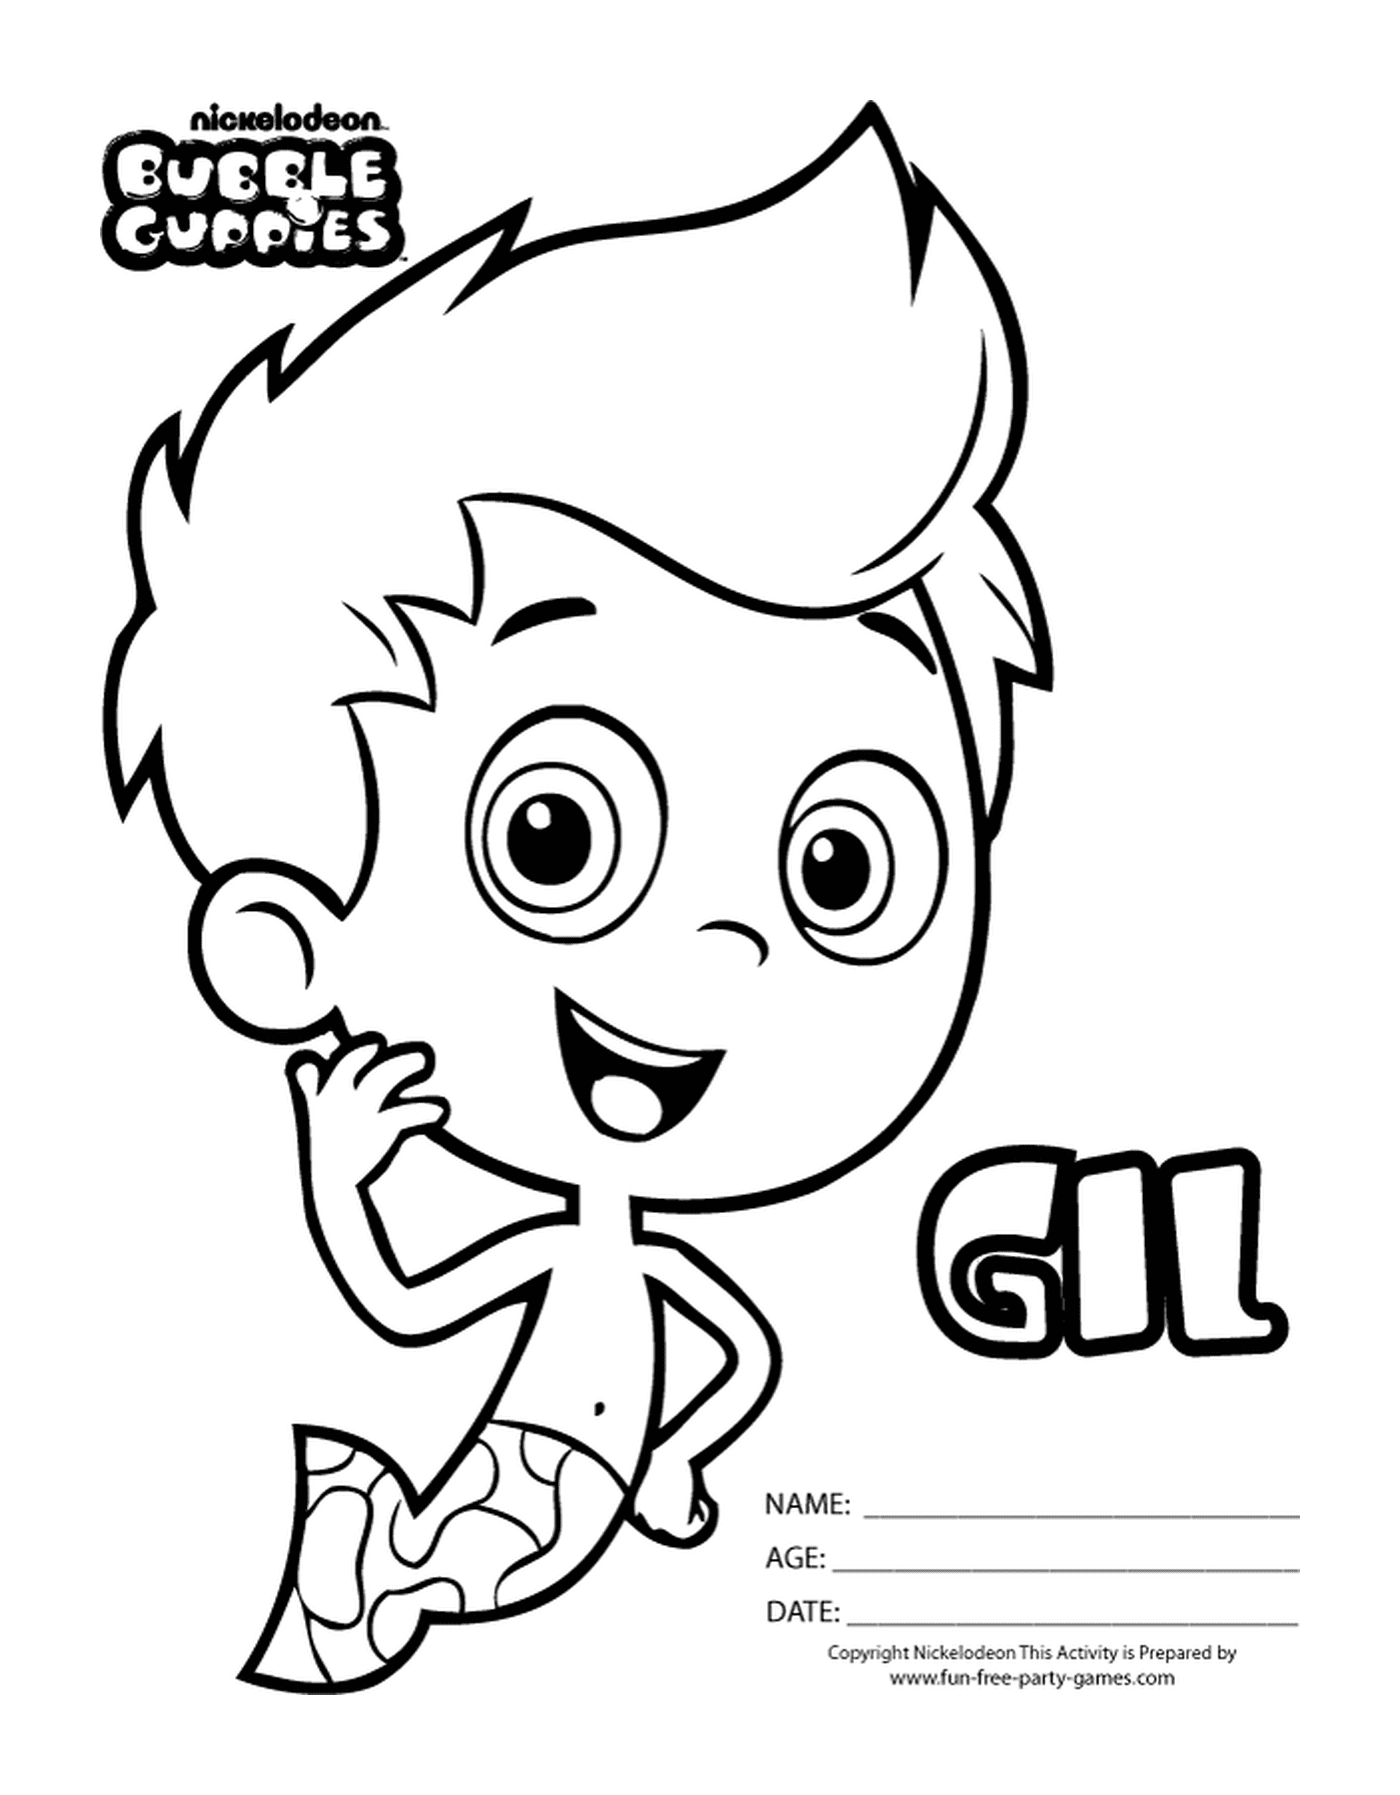  Gil of the Bubble Guppies, a little boy 